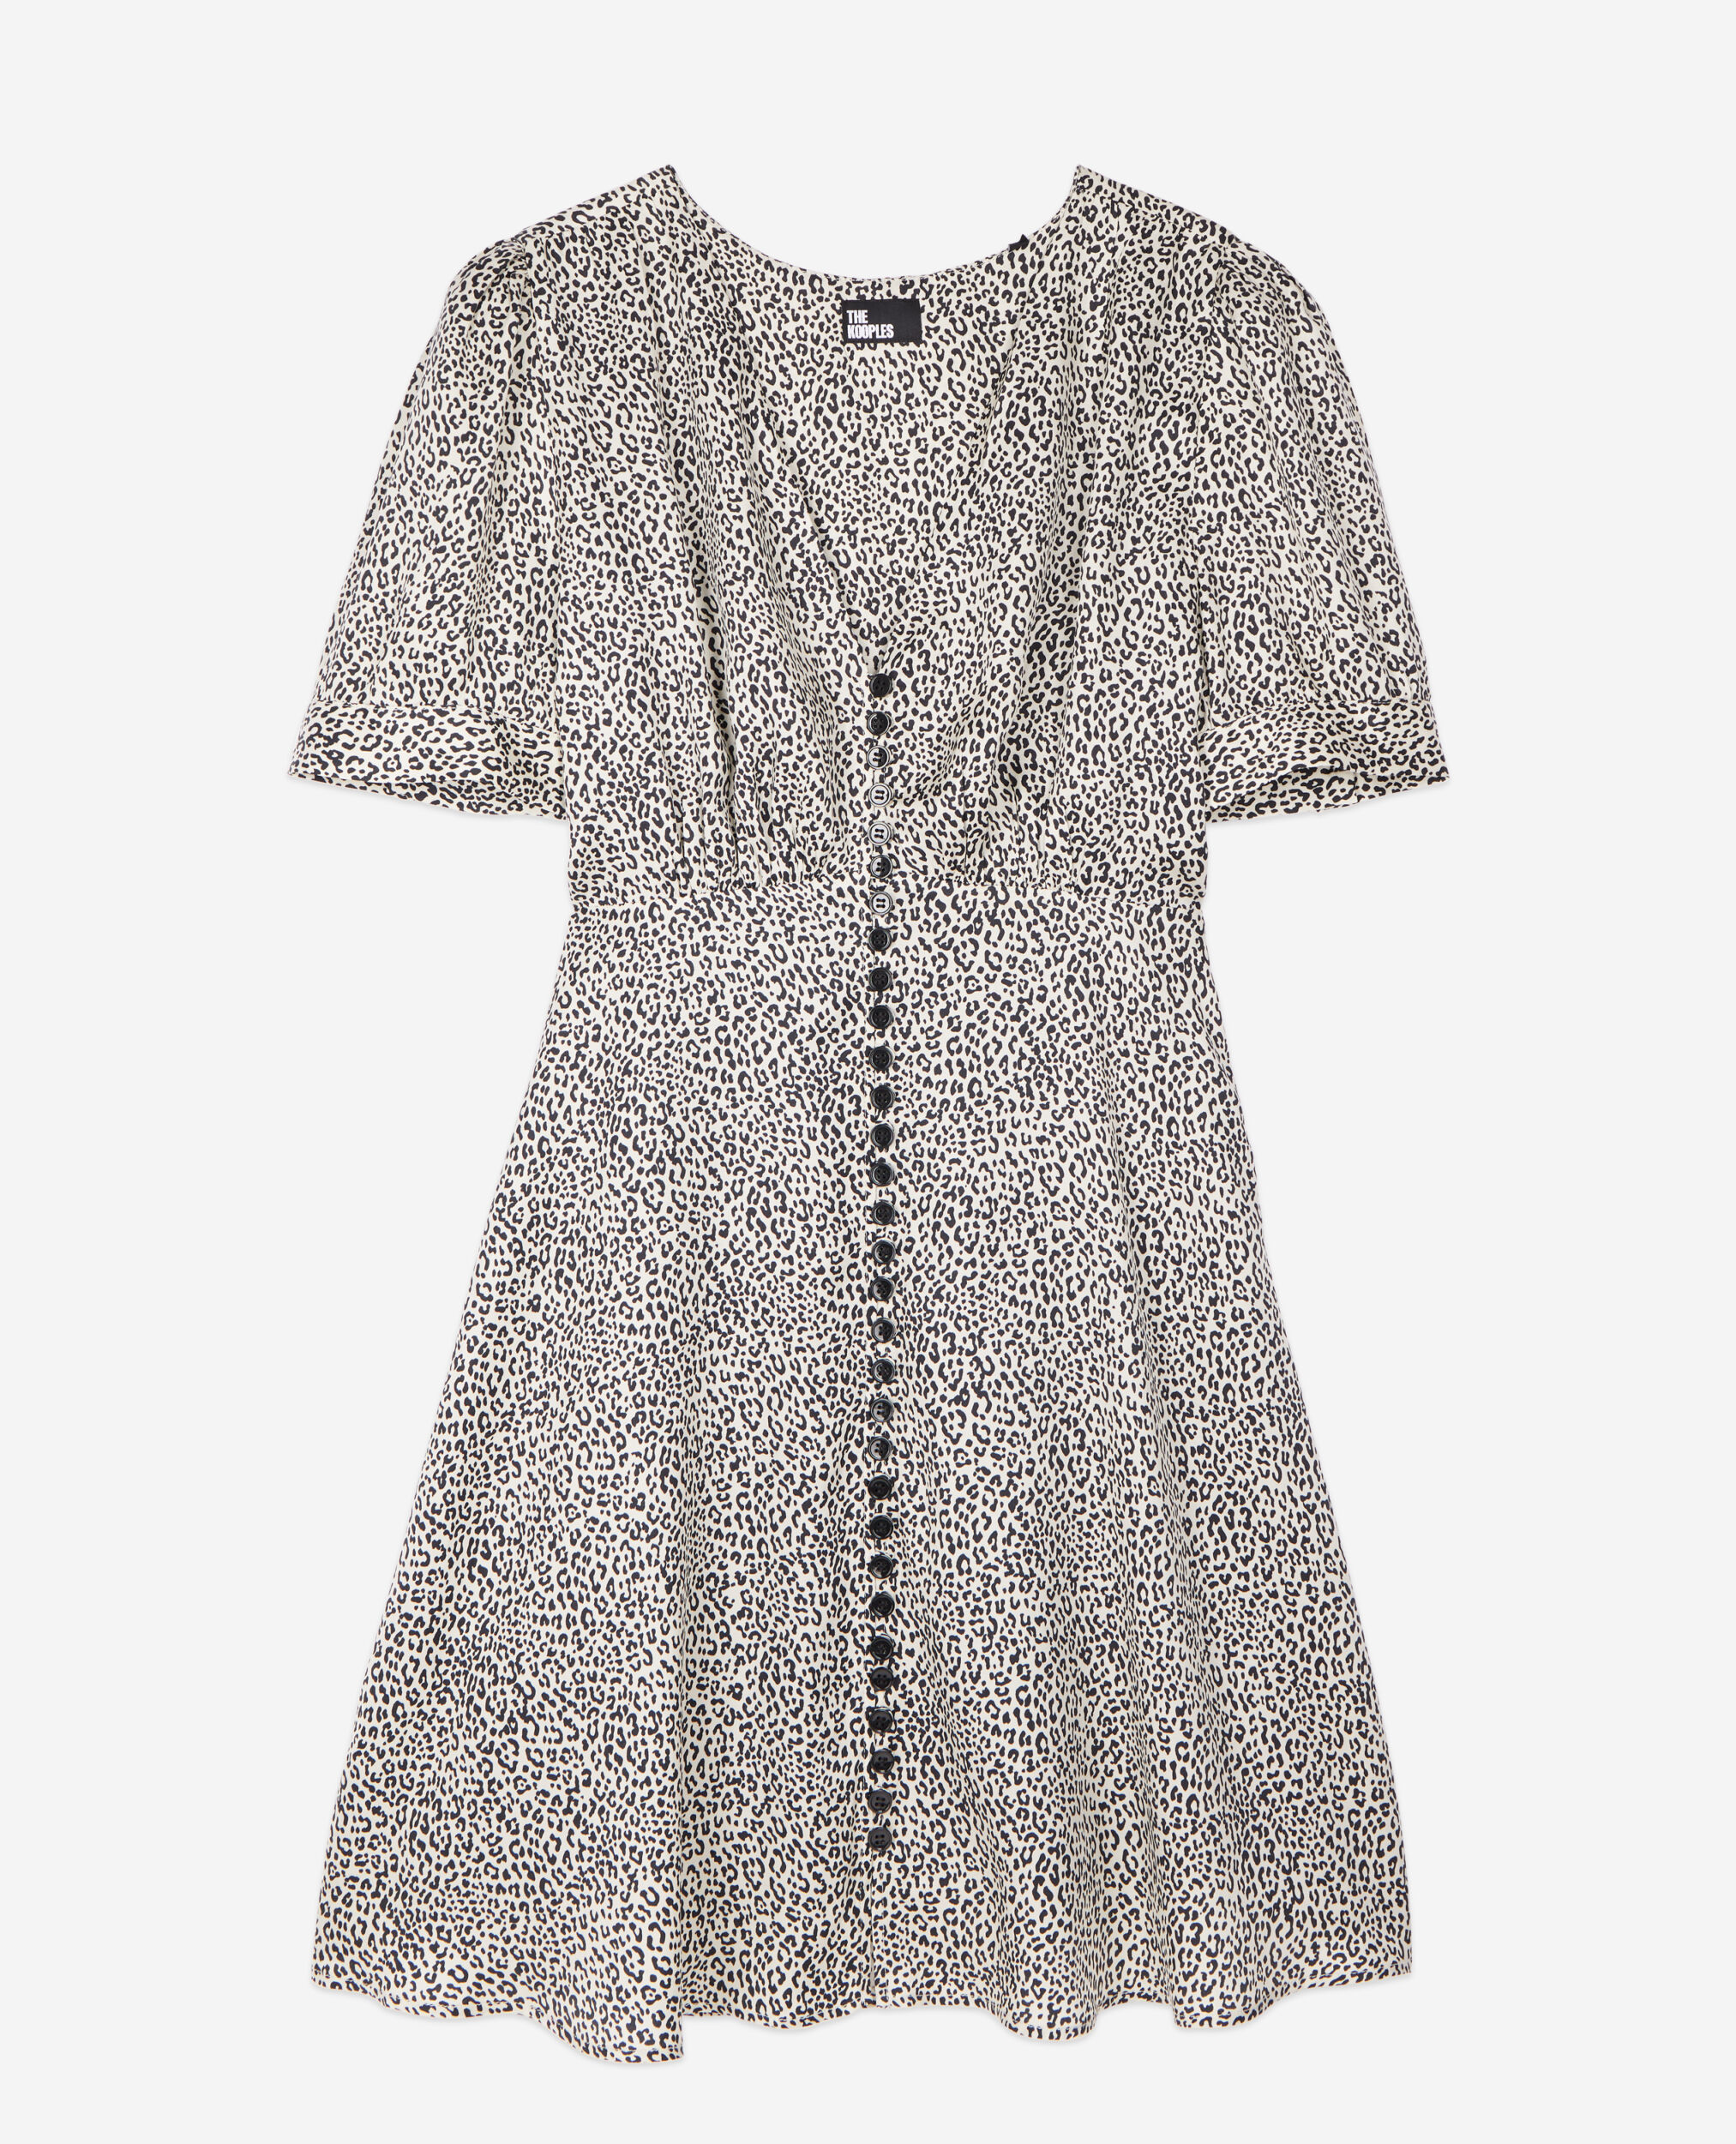 Short printed dress with buttons, BLACK WHITE, hi-res image number null